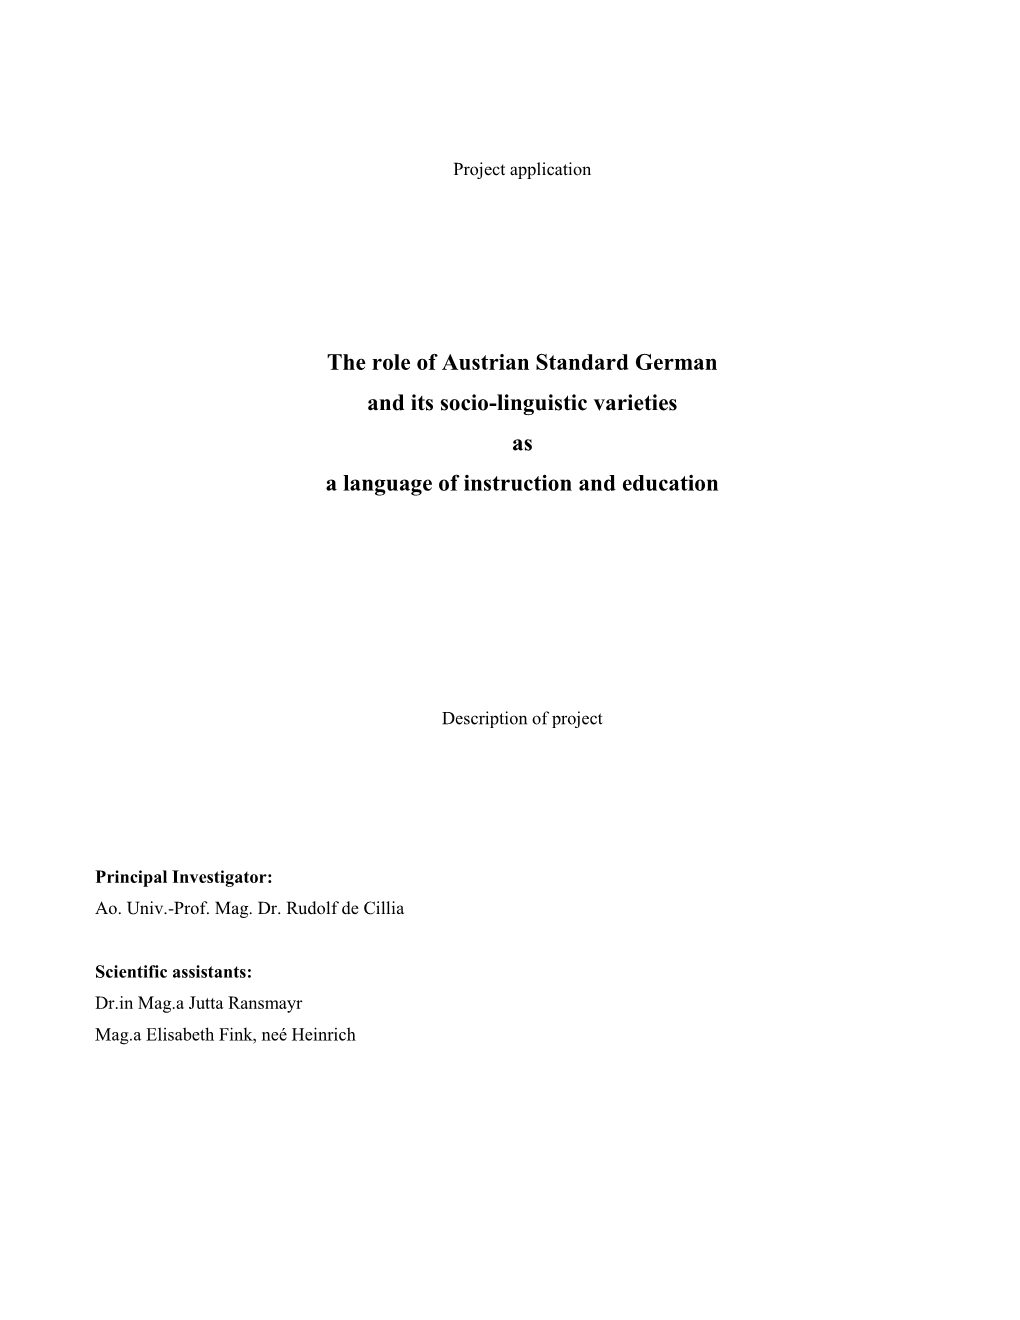 The Role of Austrian Standard German and Its Socio-Linguistic Varieties As a Language of Instruction and Education